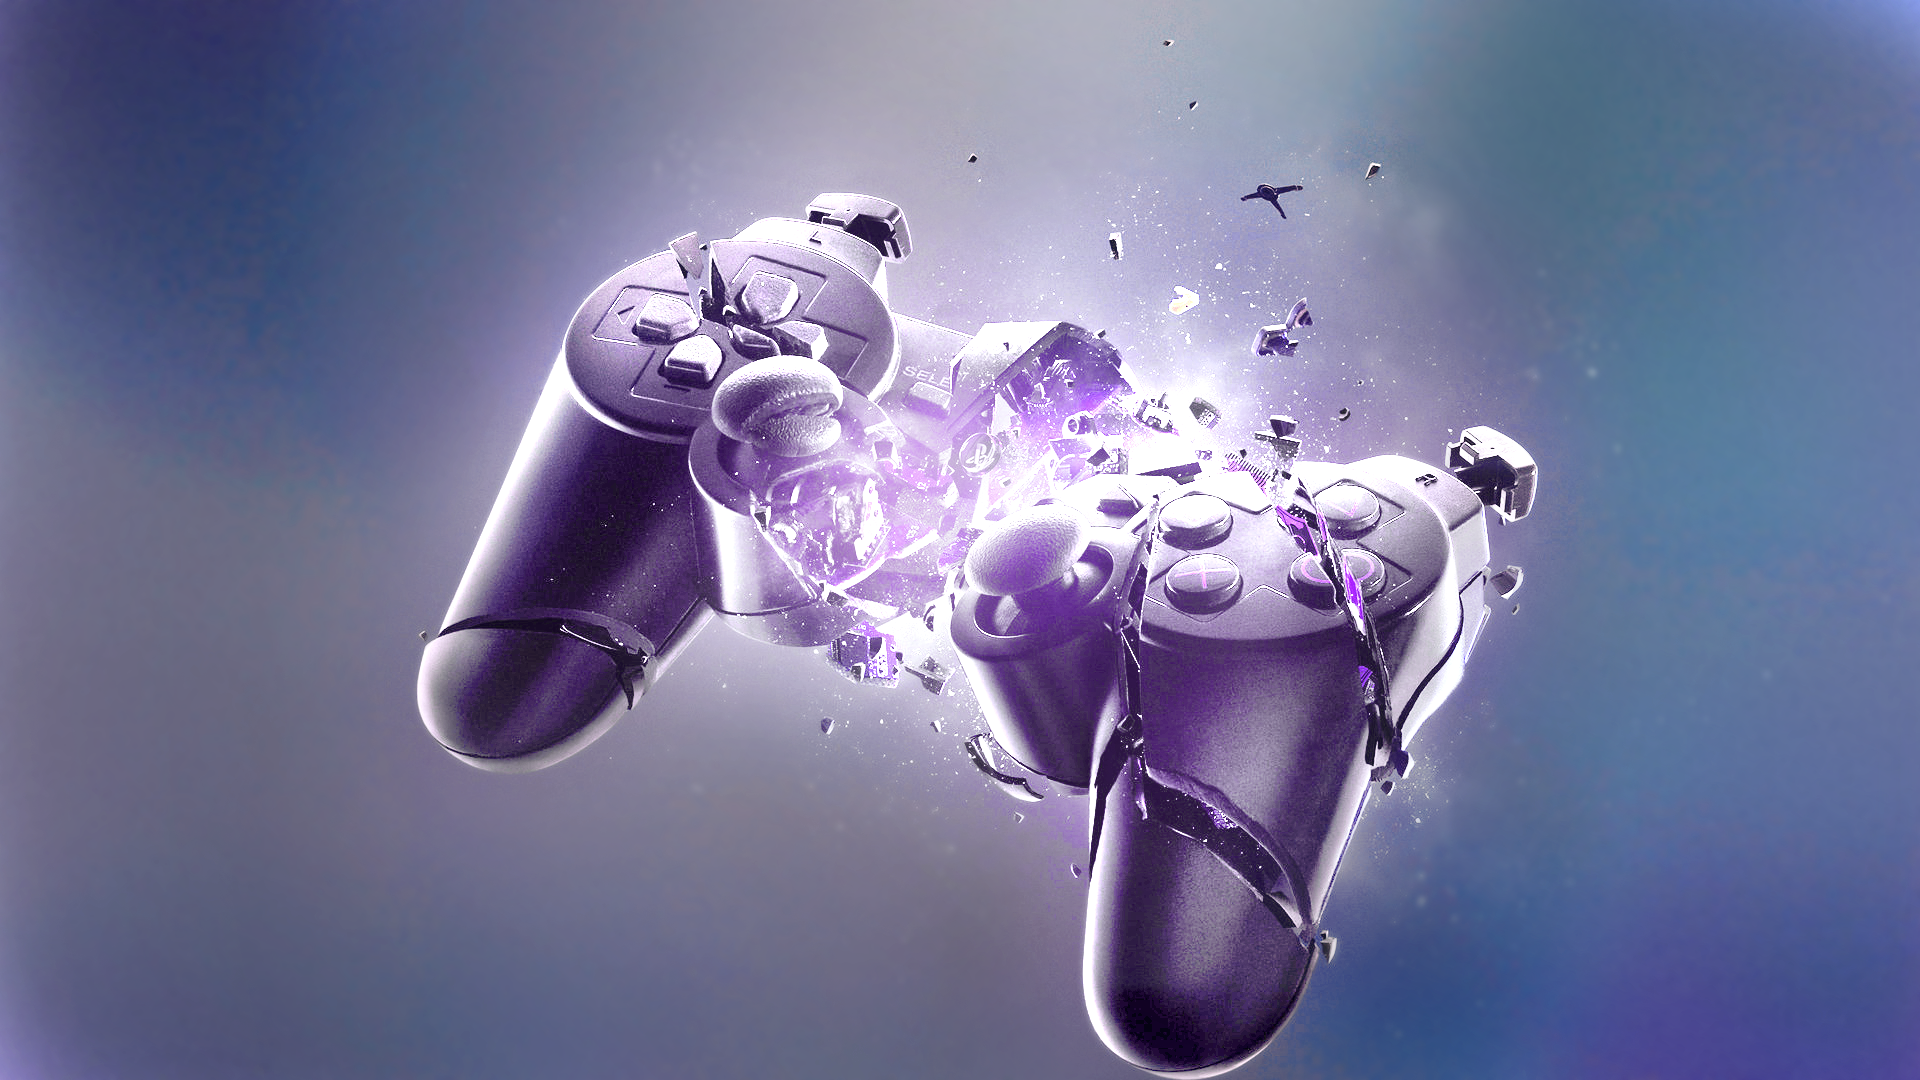 Awesome 47 Controller Wallpaper. Full HD Pics BsnSCB Graphics